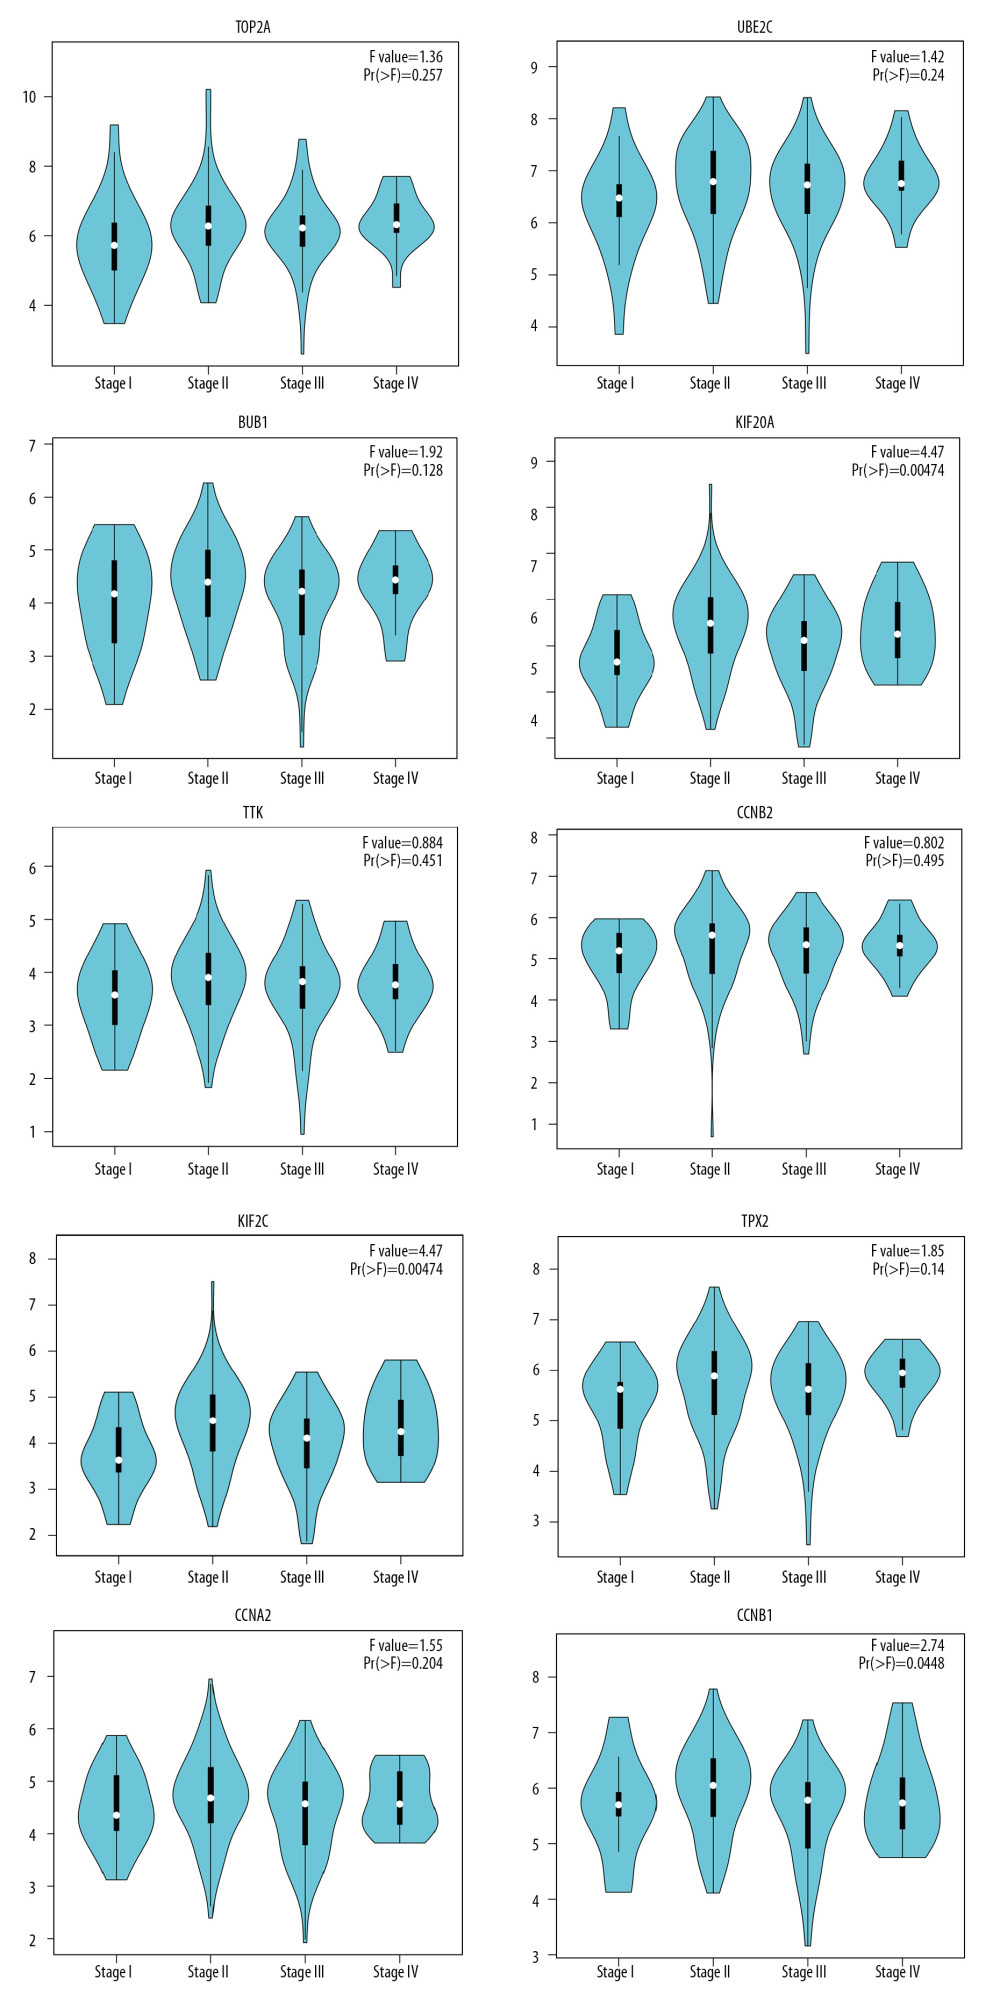 GEPIA stage-plots for the top 10 hub genes in patients at different stages of ESCA. The stage-plot is considered statistically significant when Pr >F. Greater F values represent increasing significance.